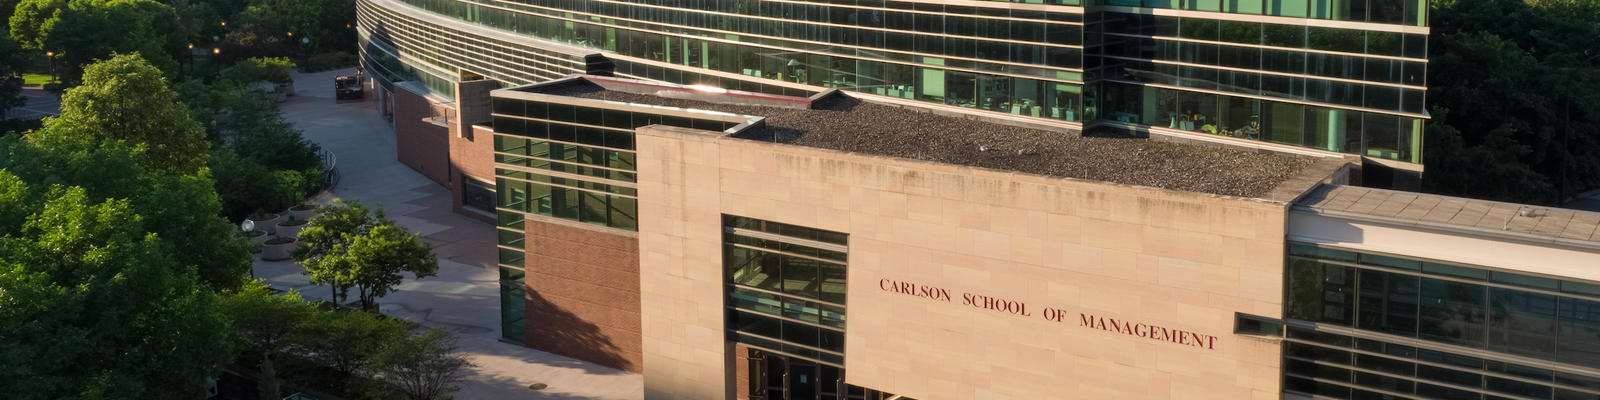 Ariel view of the Carlson School of Management building